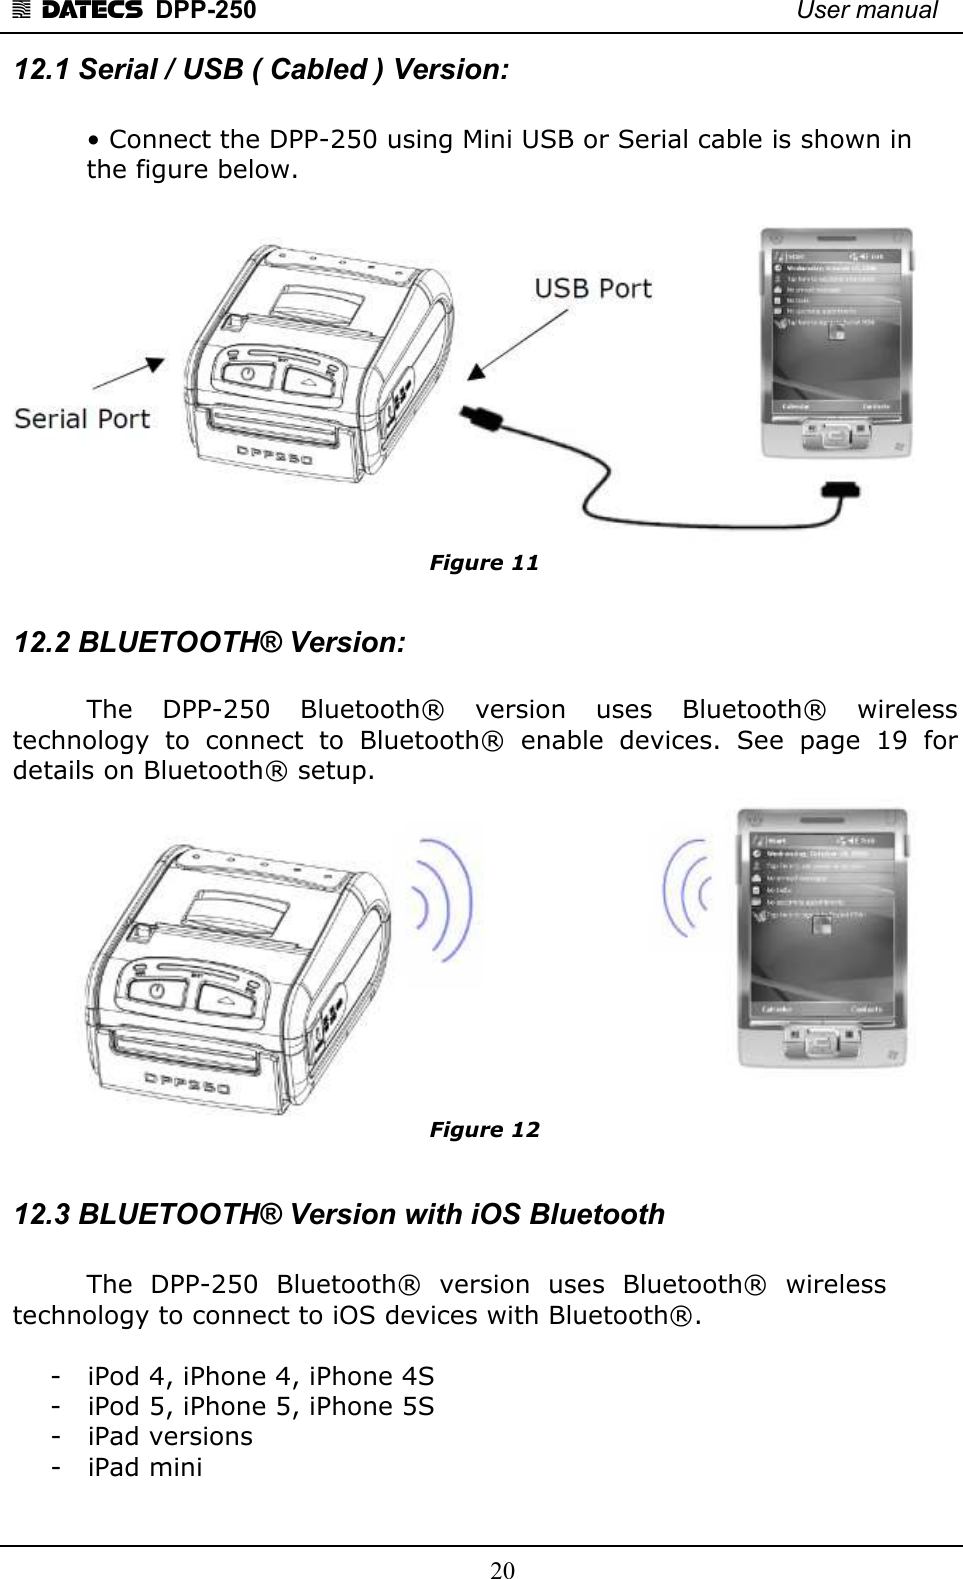 1 DATECS  DPP-250    User manual     20 12.1 Serial / USB ( Cabled ) Version:     • Connect the DPP-250 using Mini USB or Serial cable is shown in    the figure below.   Figure 11  12.2 BLUETOOTH® Version:    The    DPP-250    Bluetooth®    version    uses    Bluetooth®    wireless technology  to  connect  to  Bluetooth®  enable  devices.  See  page  19  for details on Bluetooth® setup.  Figure 12  12.3 BLUETOOTH® Version with iOS Bluetooth     The  DPP-250  Bluetooth®  version  uses  Bluetooth®  wireless technology to connect to iOS devices with Bluetooth®.  - iPod 4, iPhone 4, iPhone 4S - iPod 5, iPhone 5, iPhone 5S - iPad versions - iPad mini  